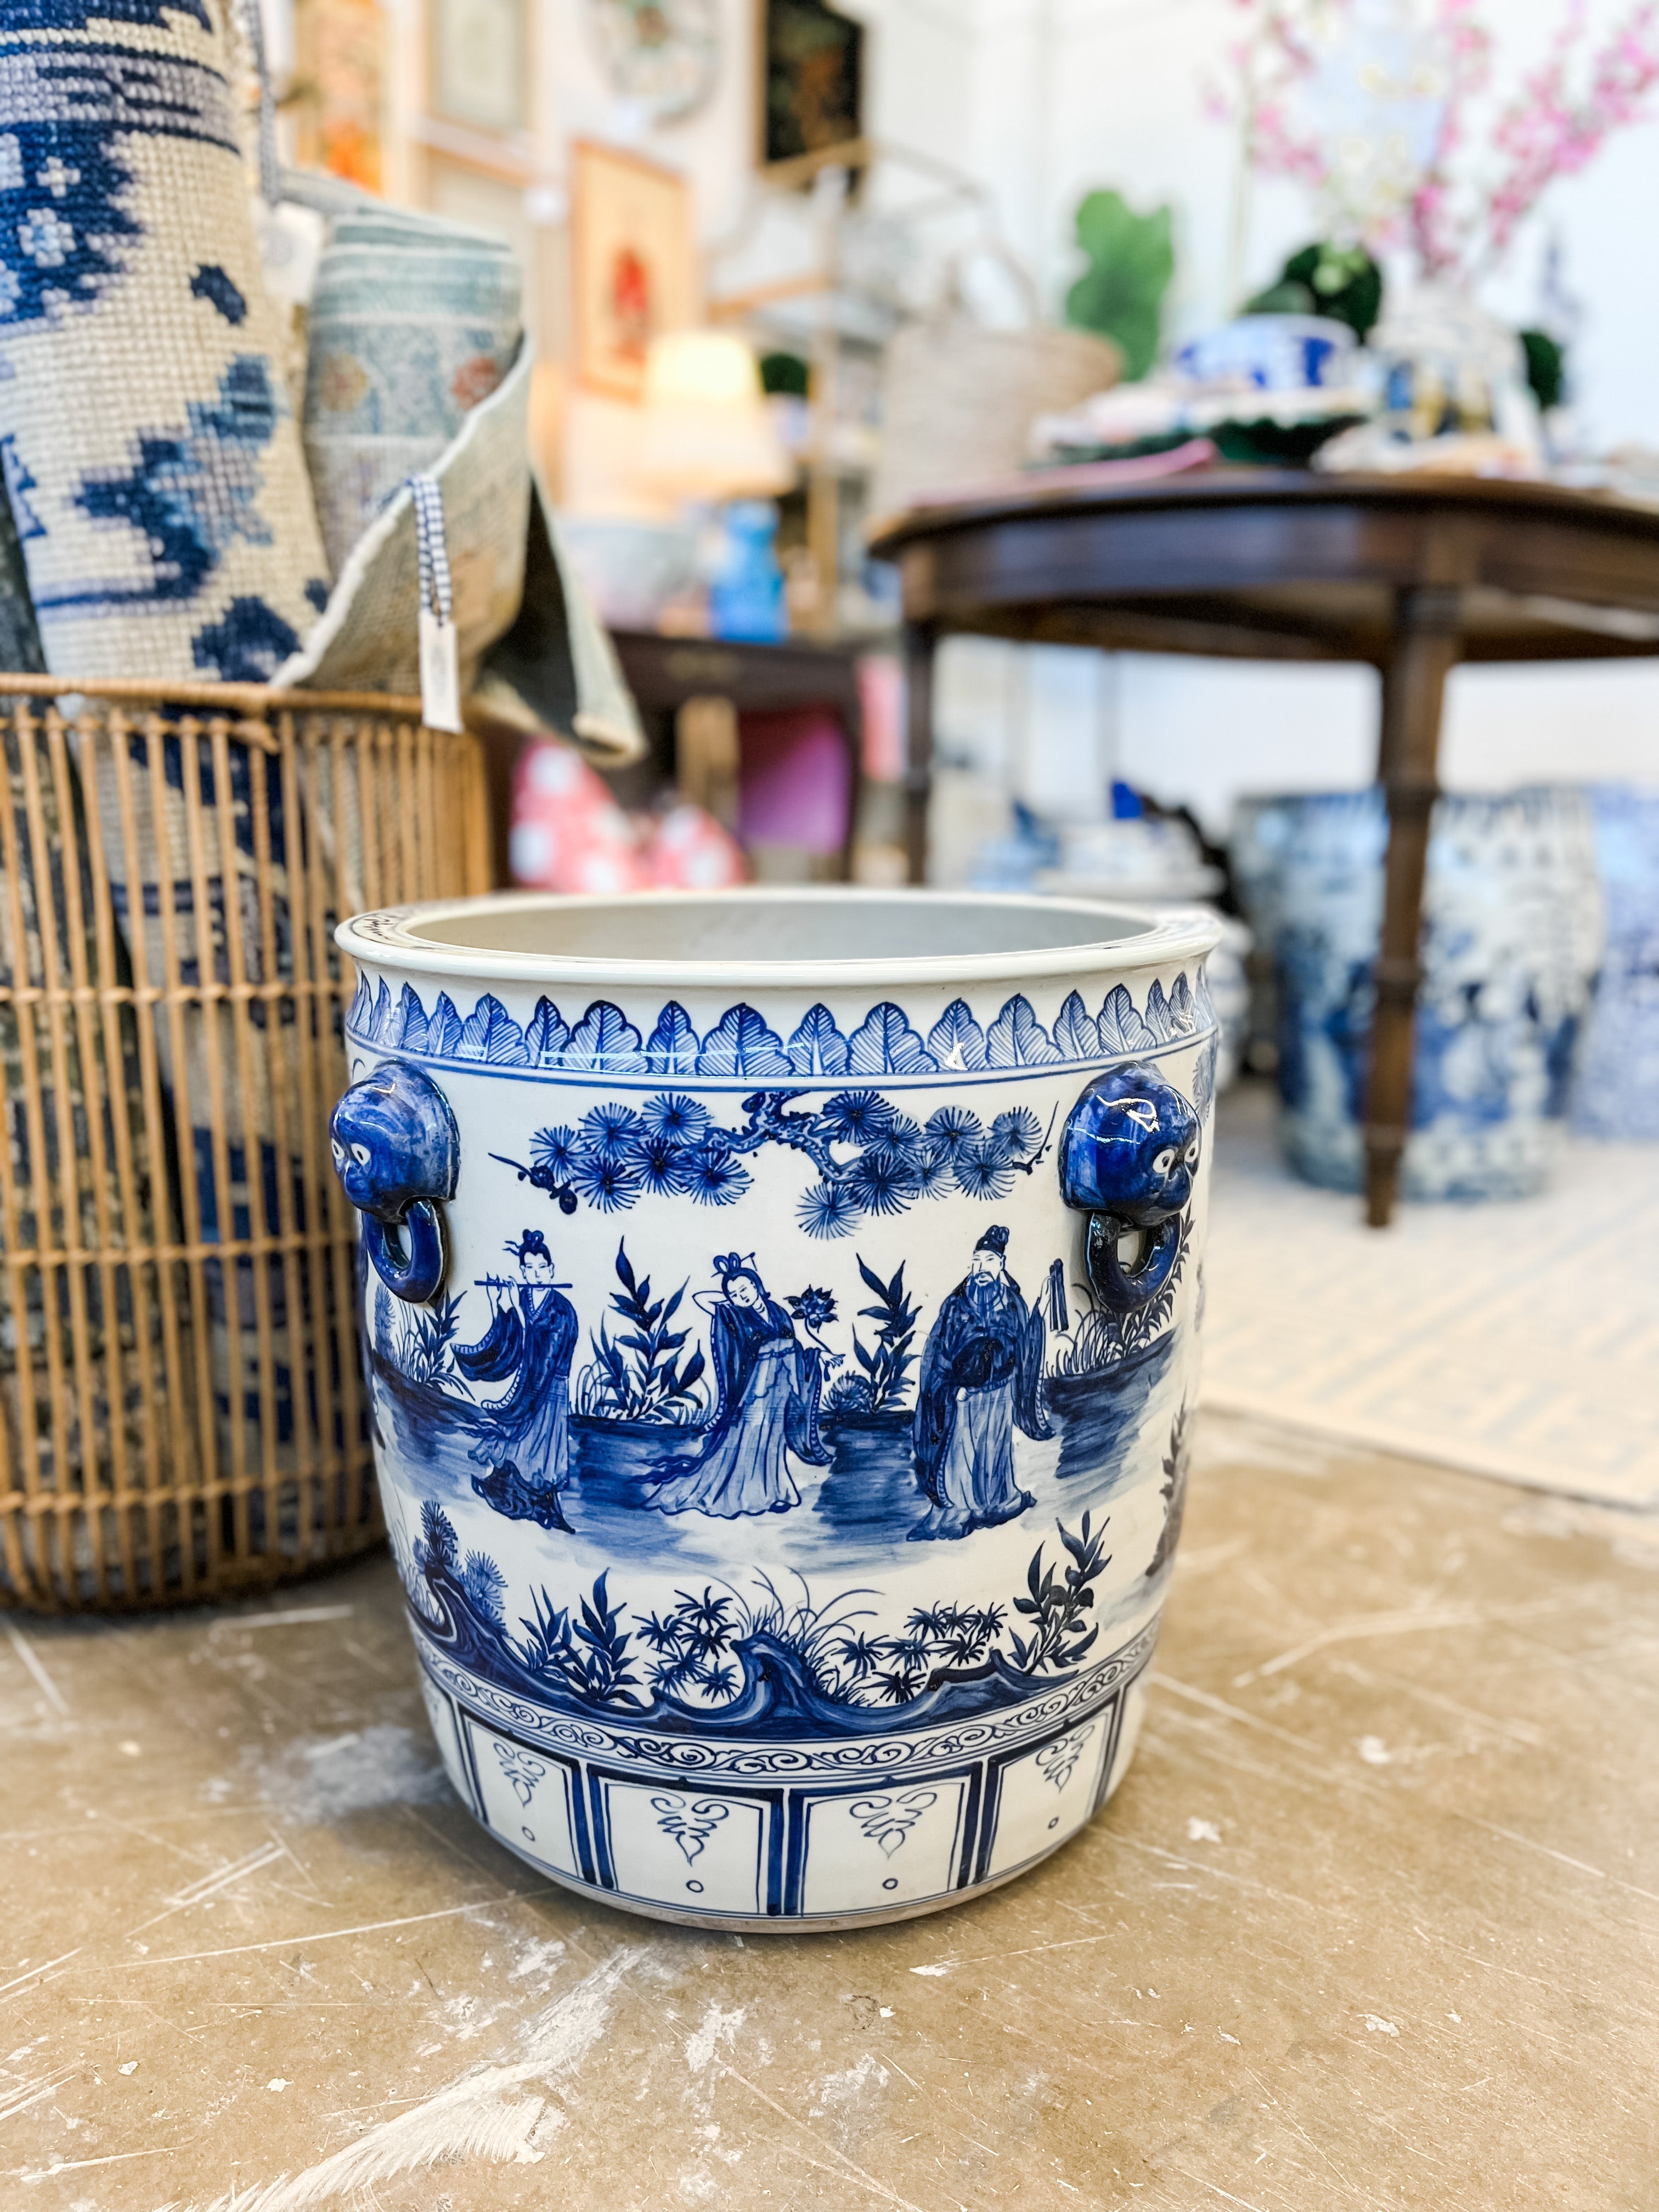 Antique-Style Blue and White Extra-Large Planter with People